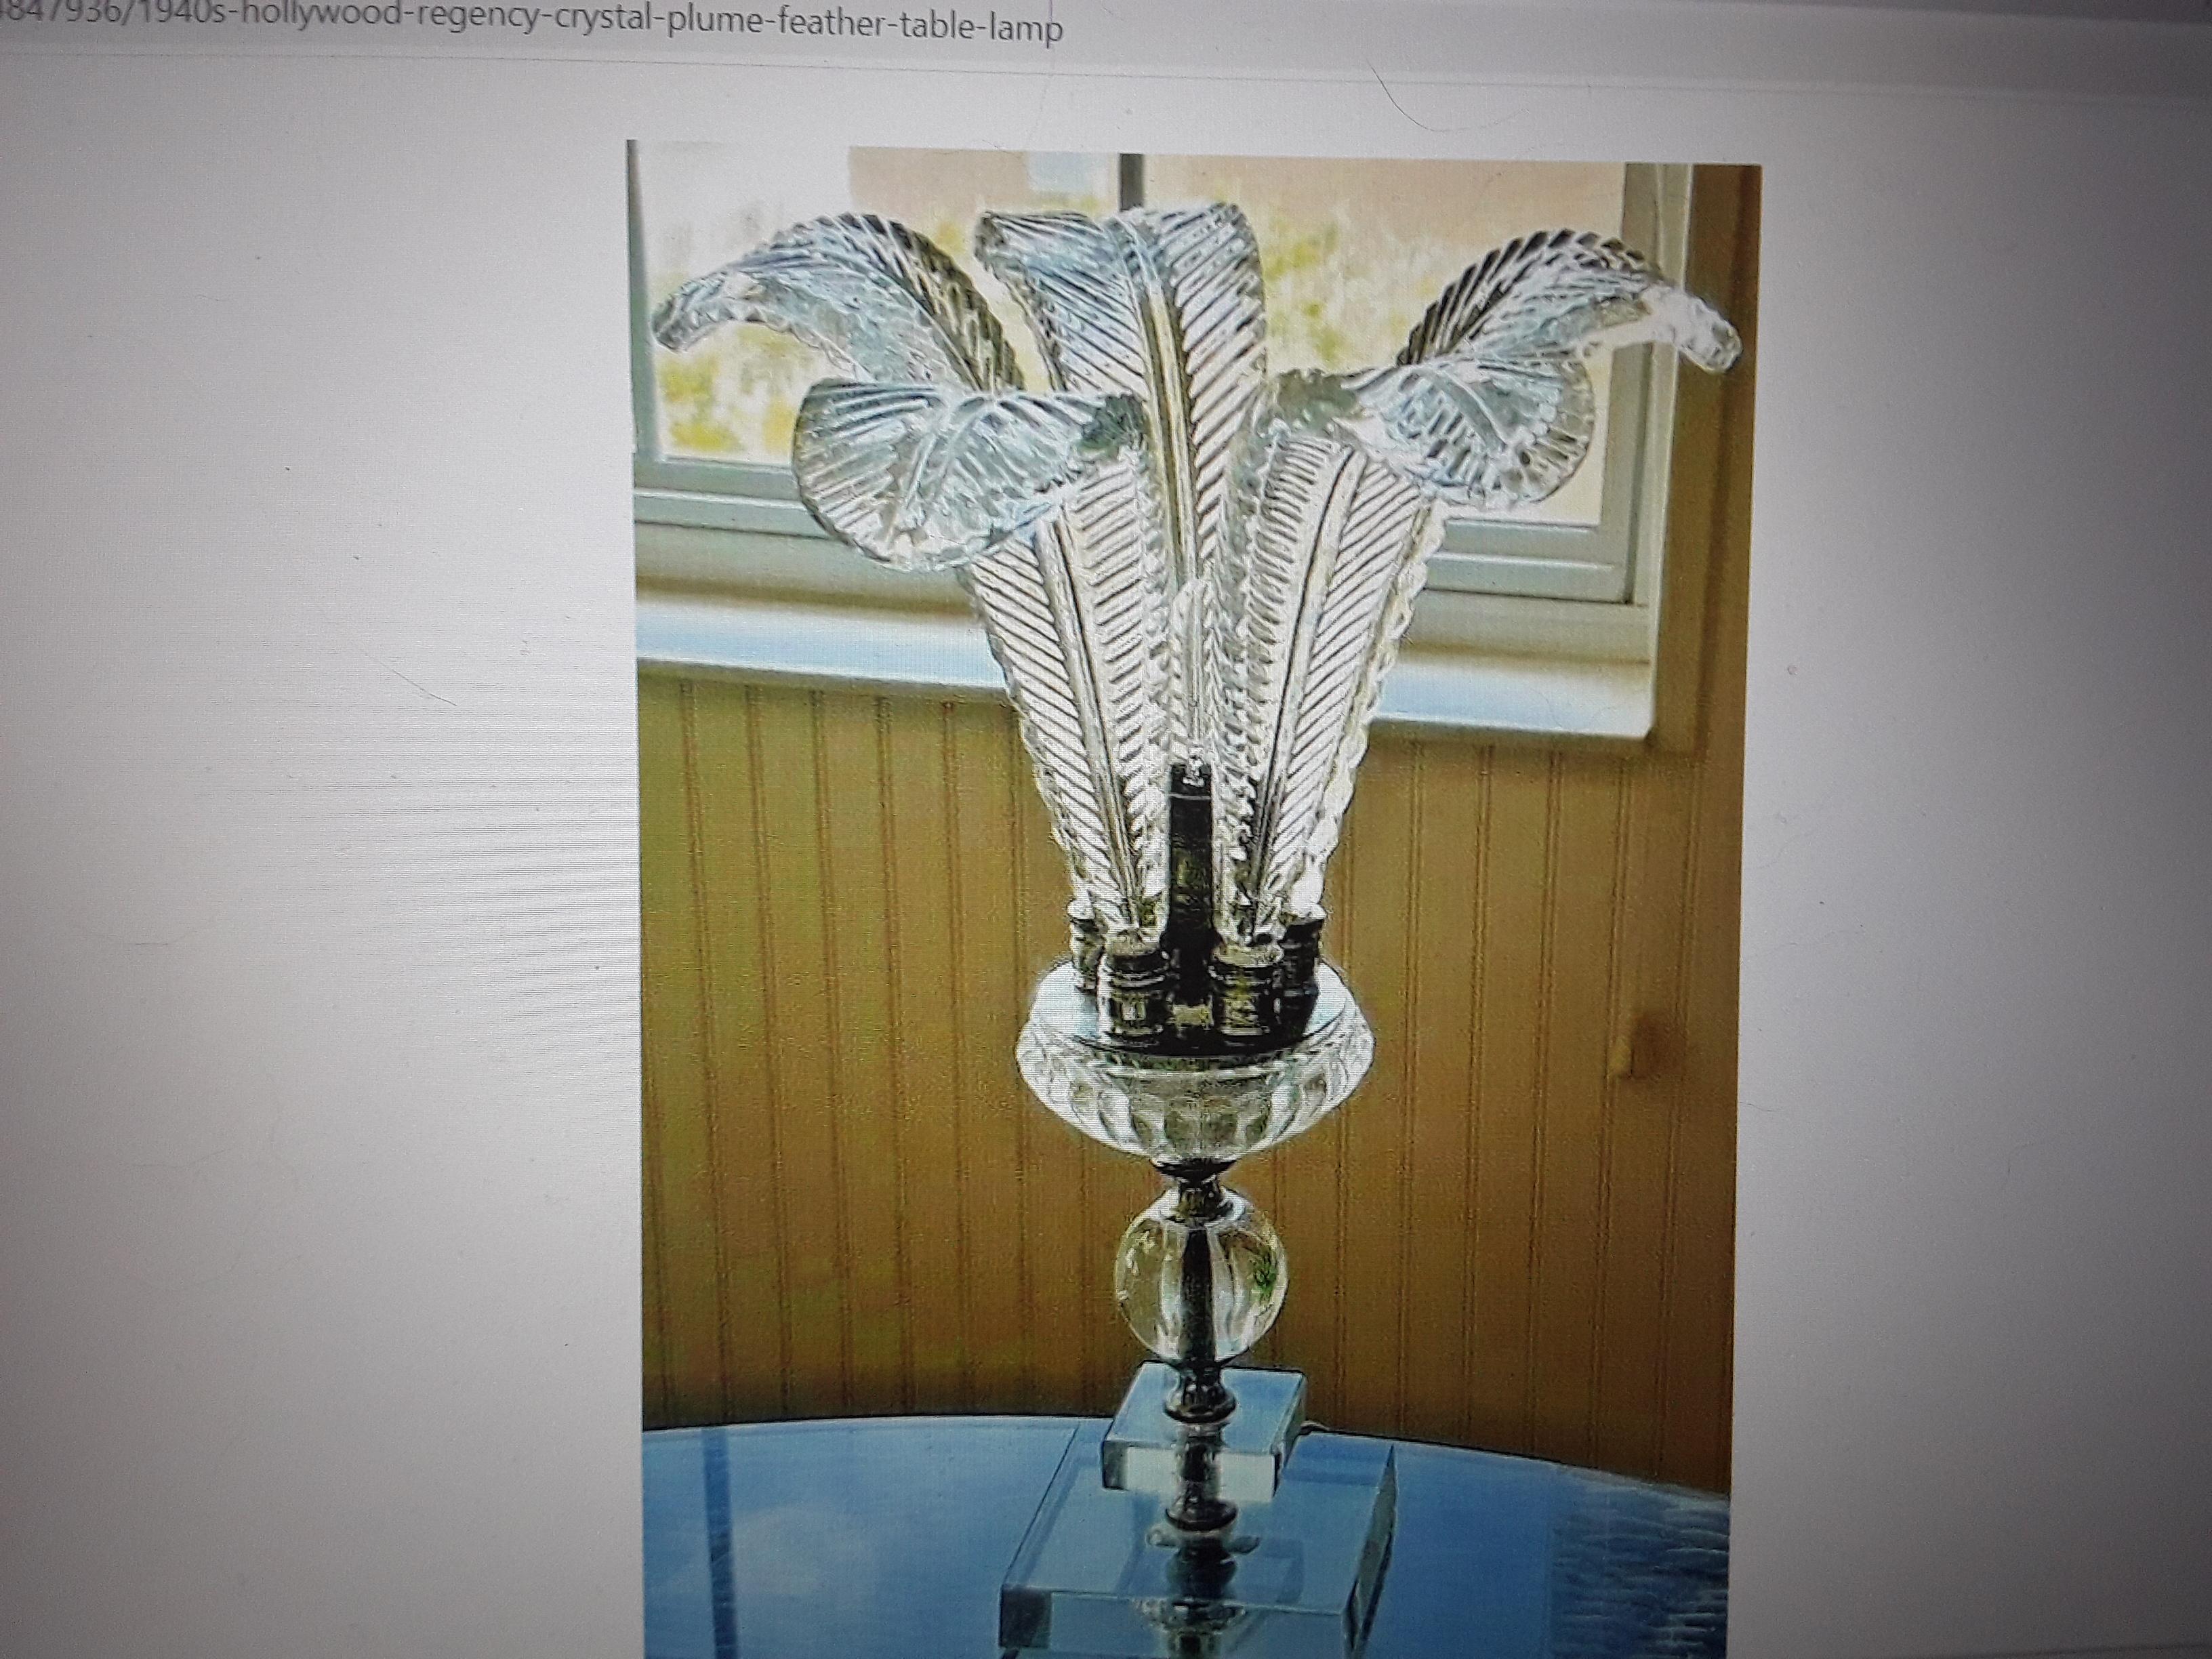 1940's Hollywood Regency Crystal Plume Feather Table Lamp. Beautiful collectable In Good Condition For Sale In Opa Locka, FL